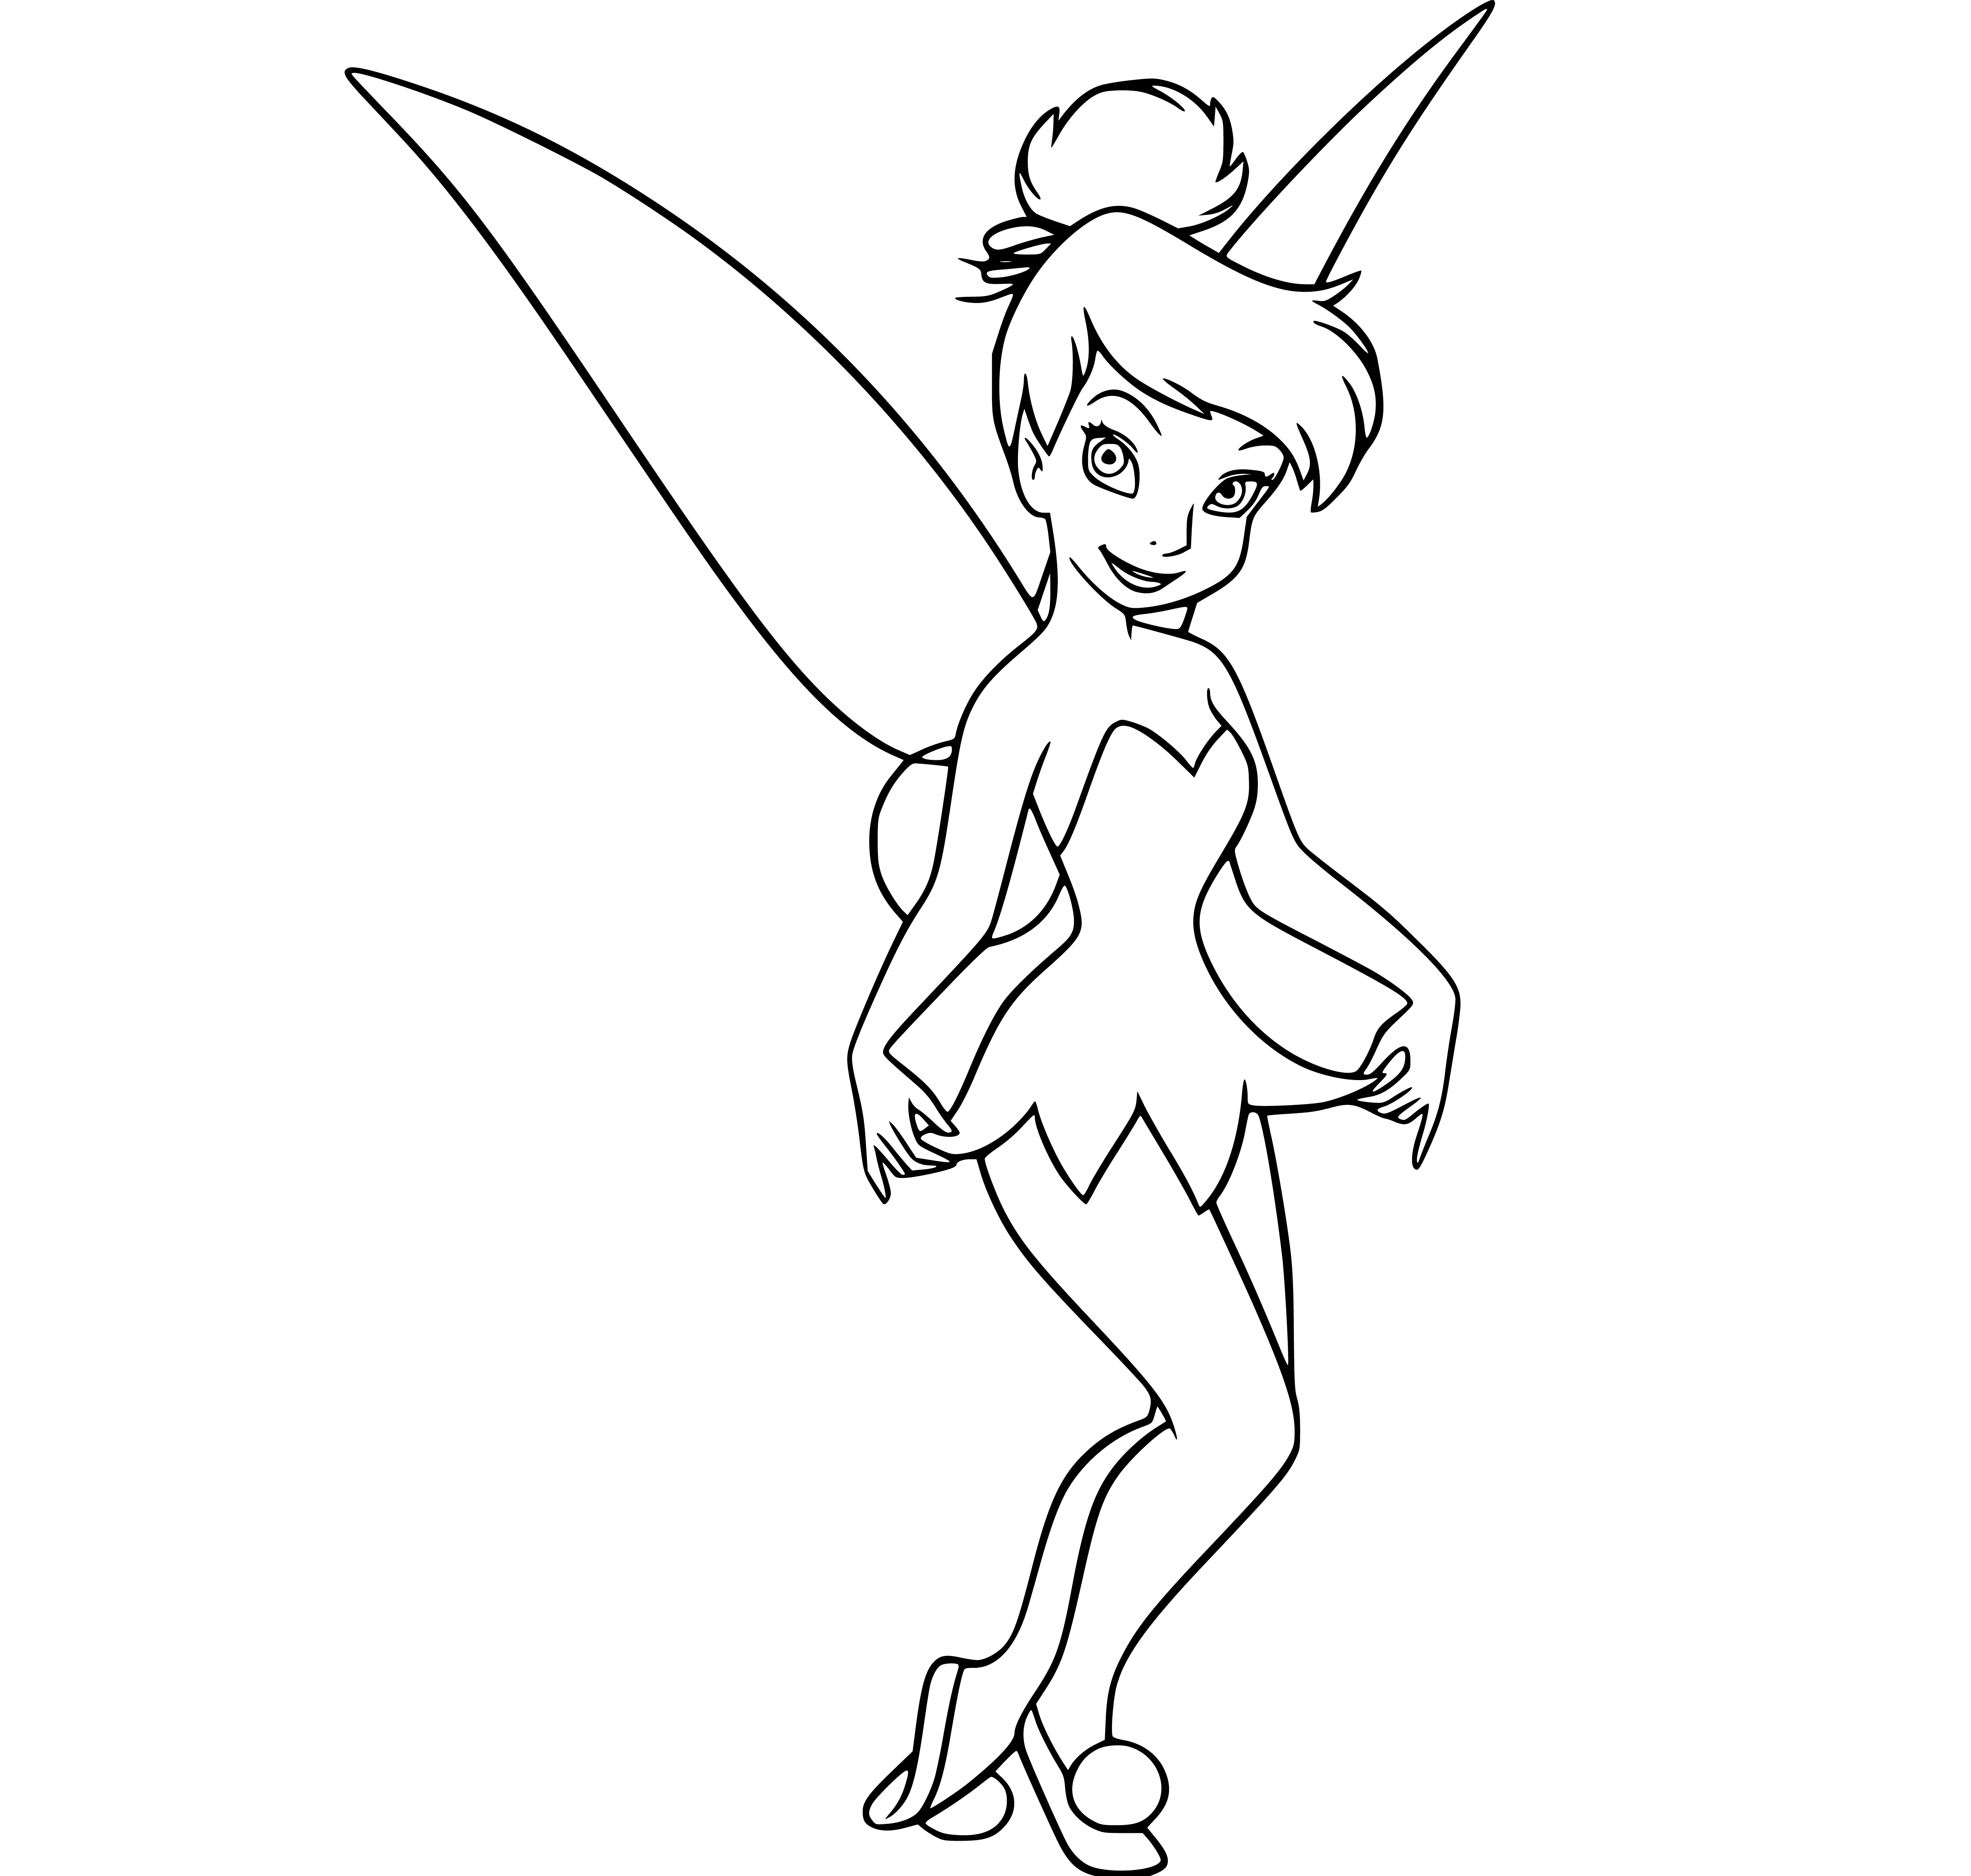 Tinker Bell Coloring Page for Kids - SheetalColor.com